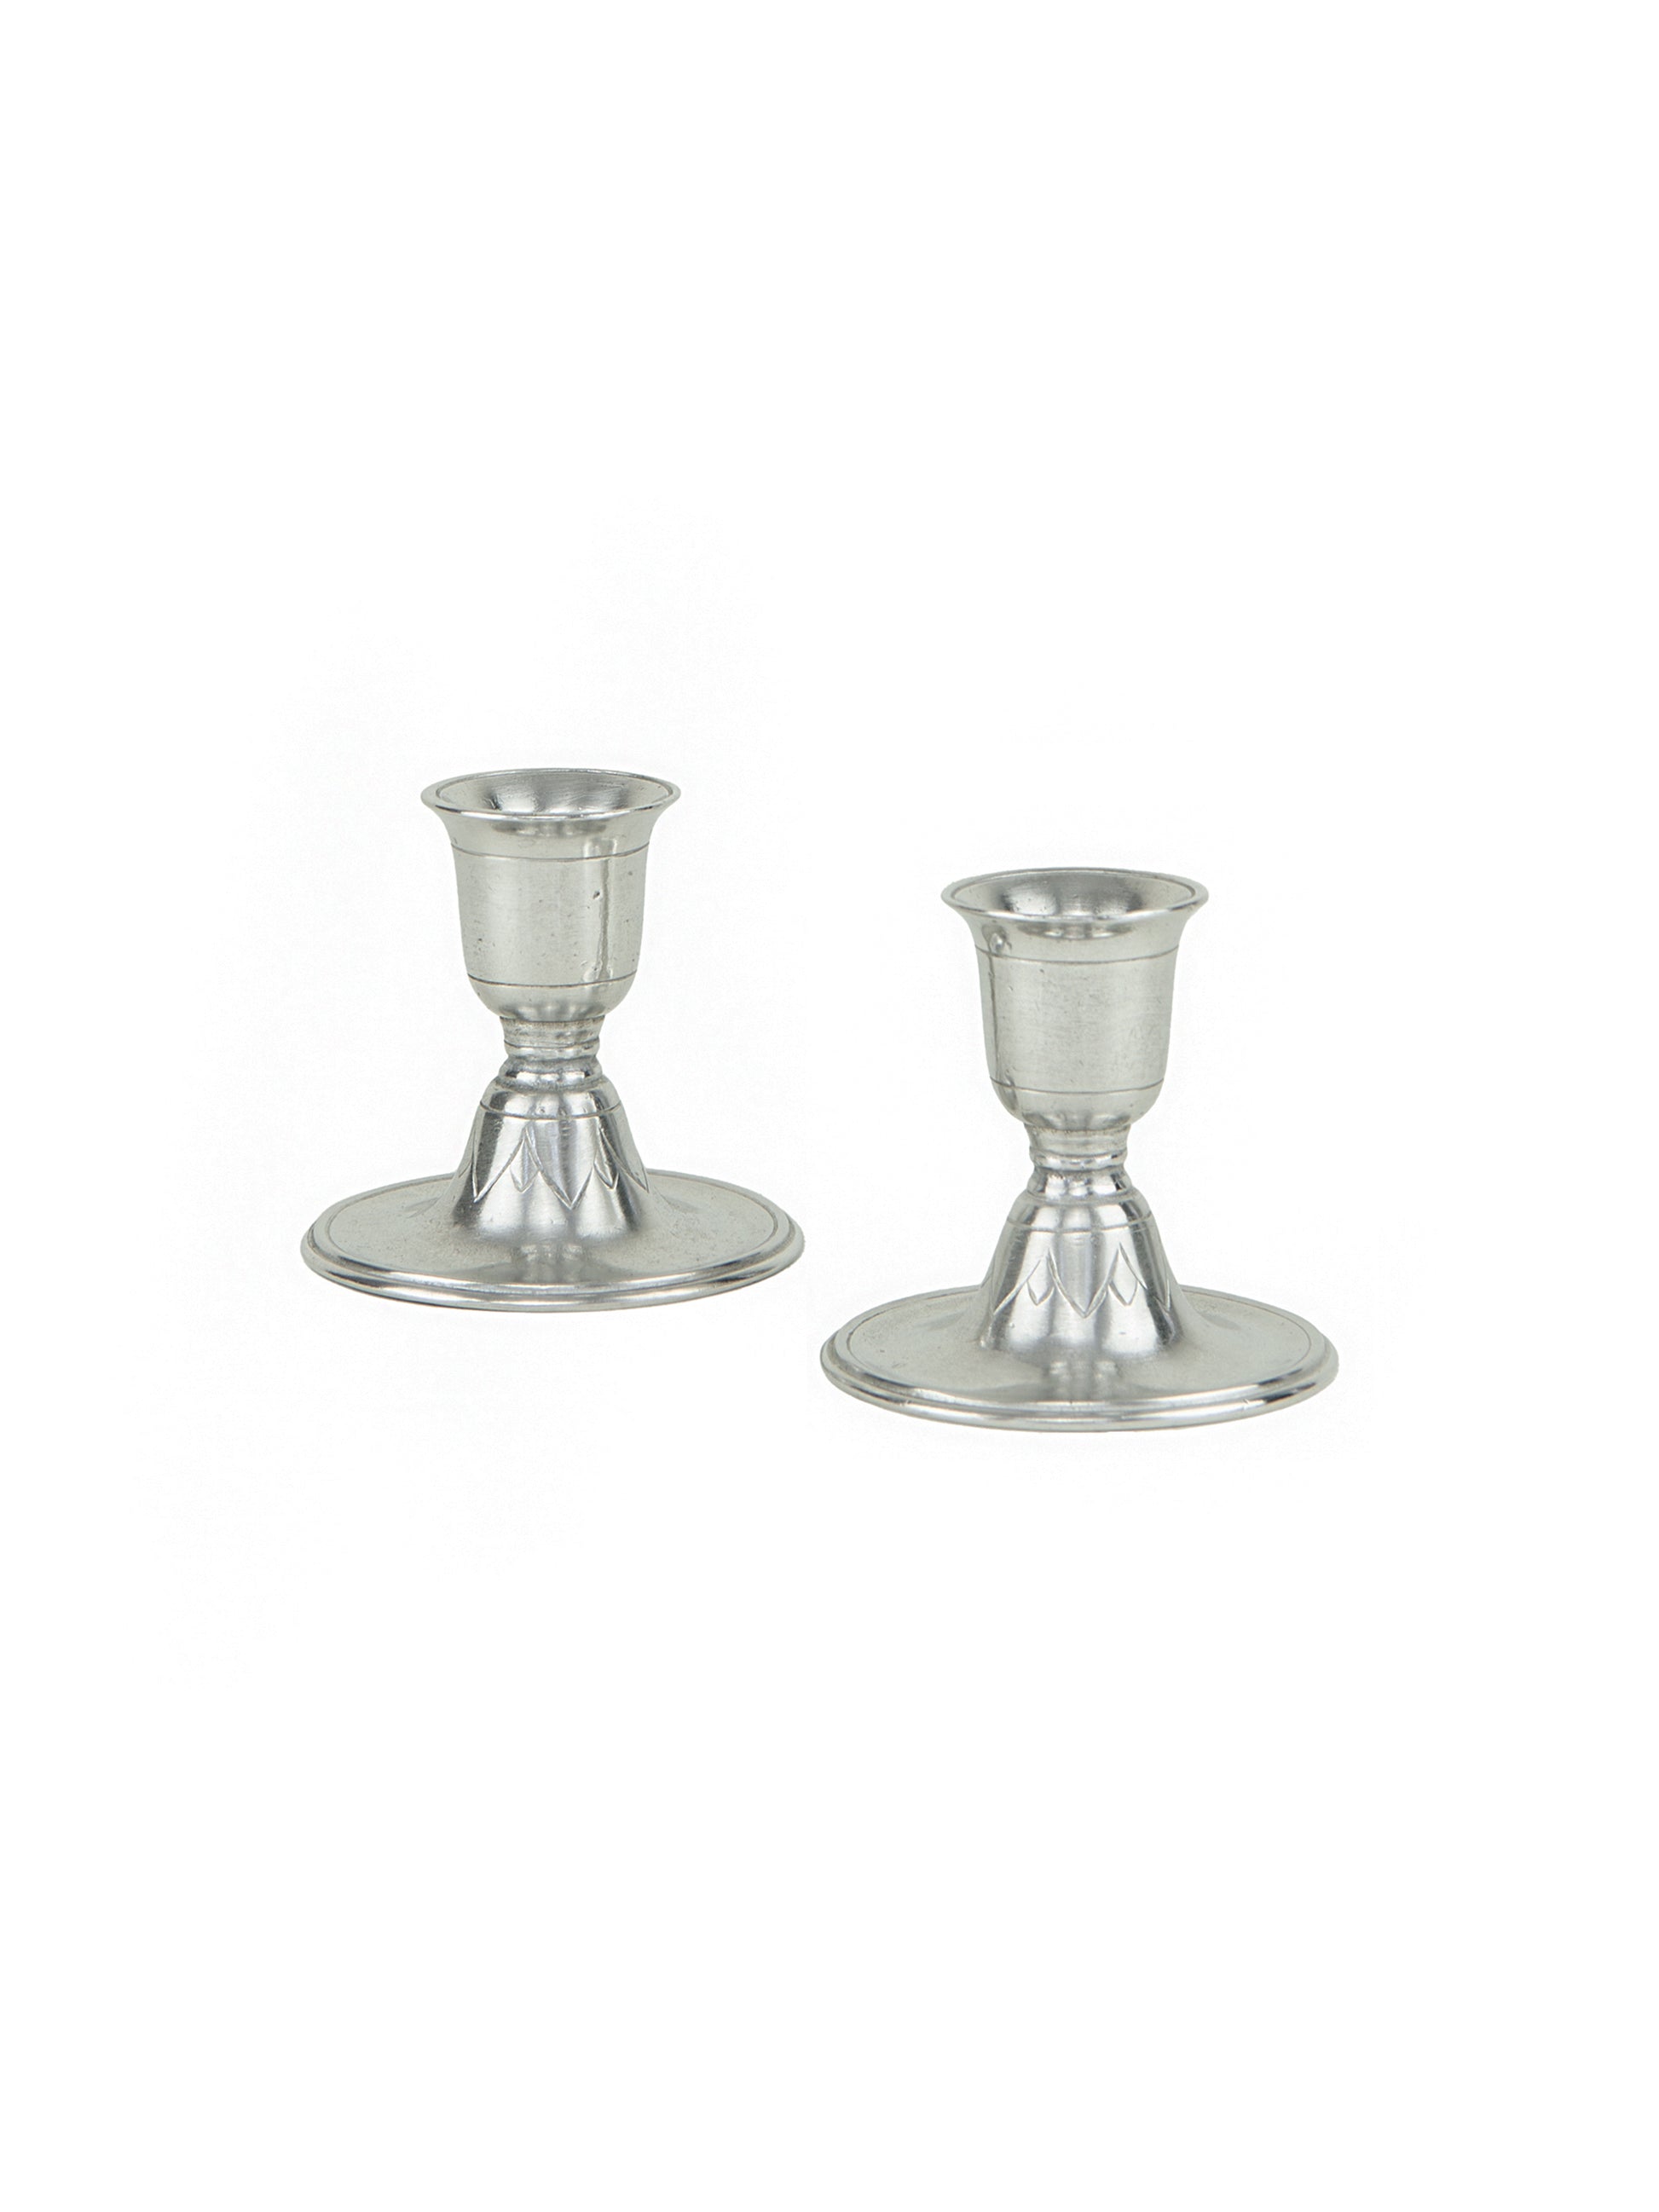 MATCH Pewter Short Candlestick Pair Weston Table